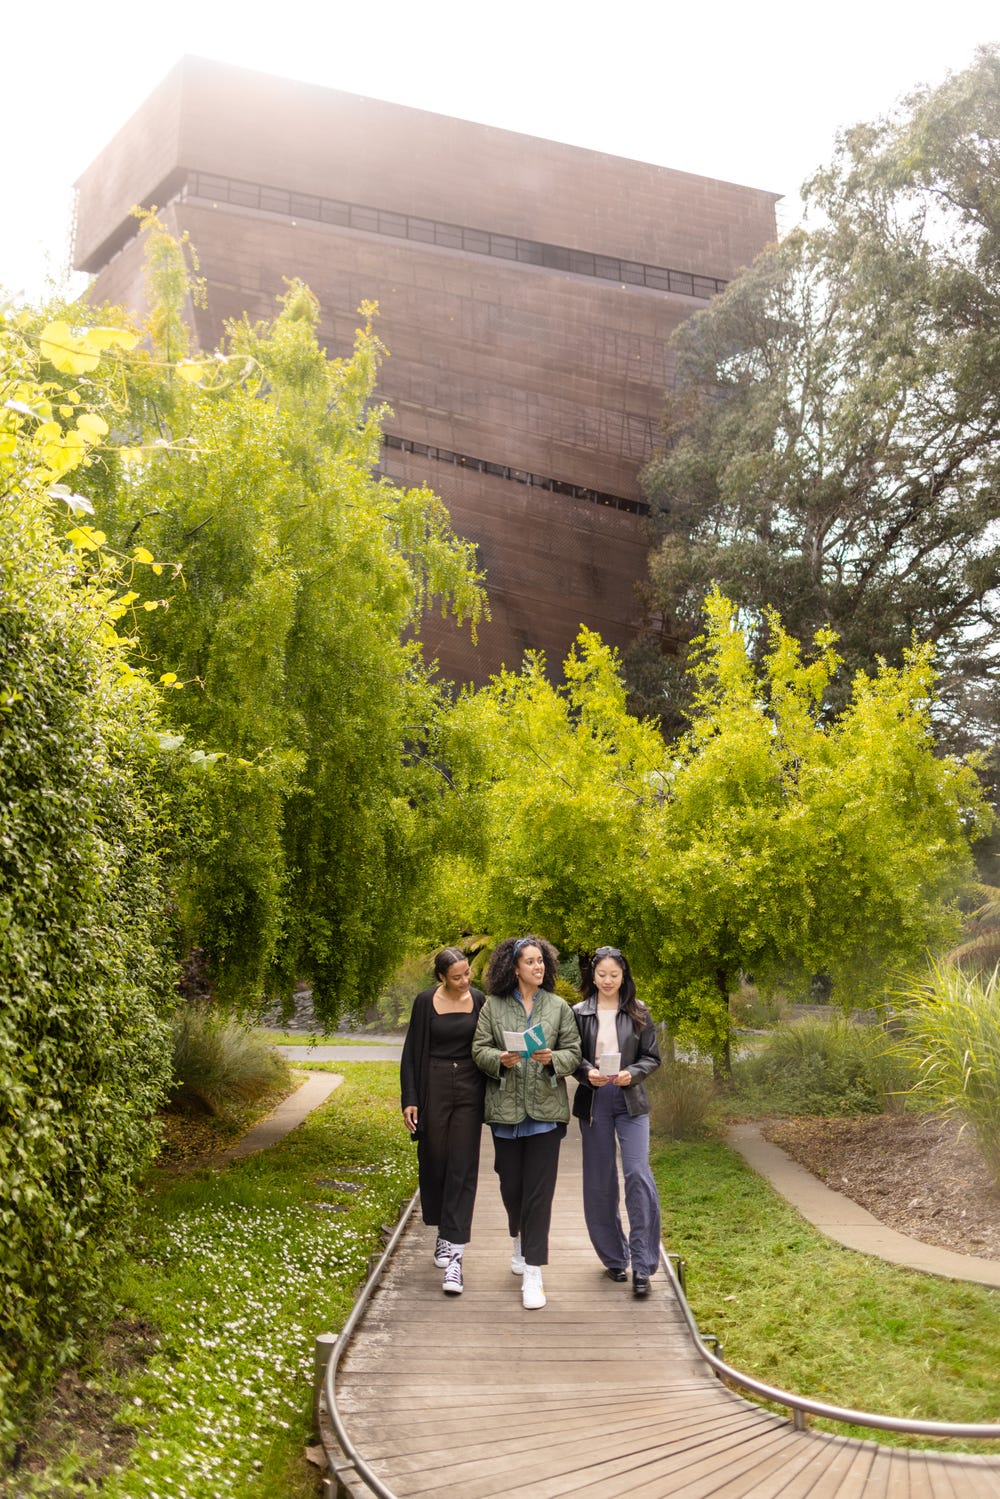 three young women walking in a garden in front of the de Young tower